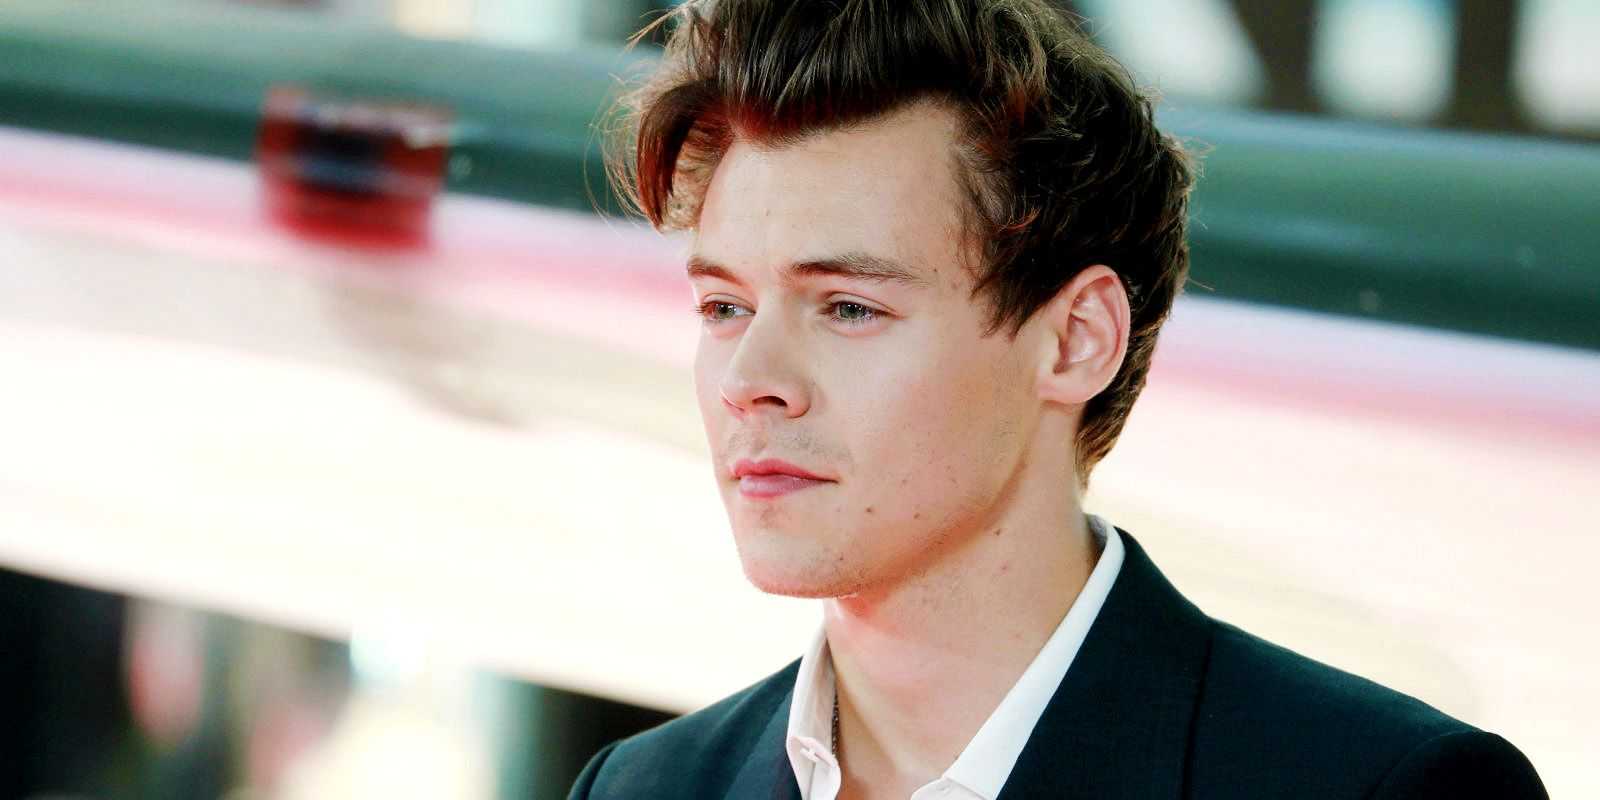 Harry Styles dazzles in 'Dunkirk': An insider's look at his big screen debut